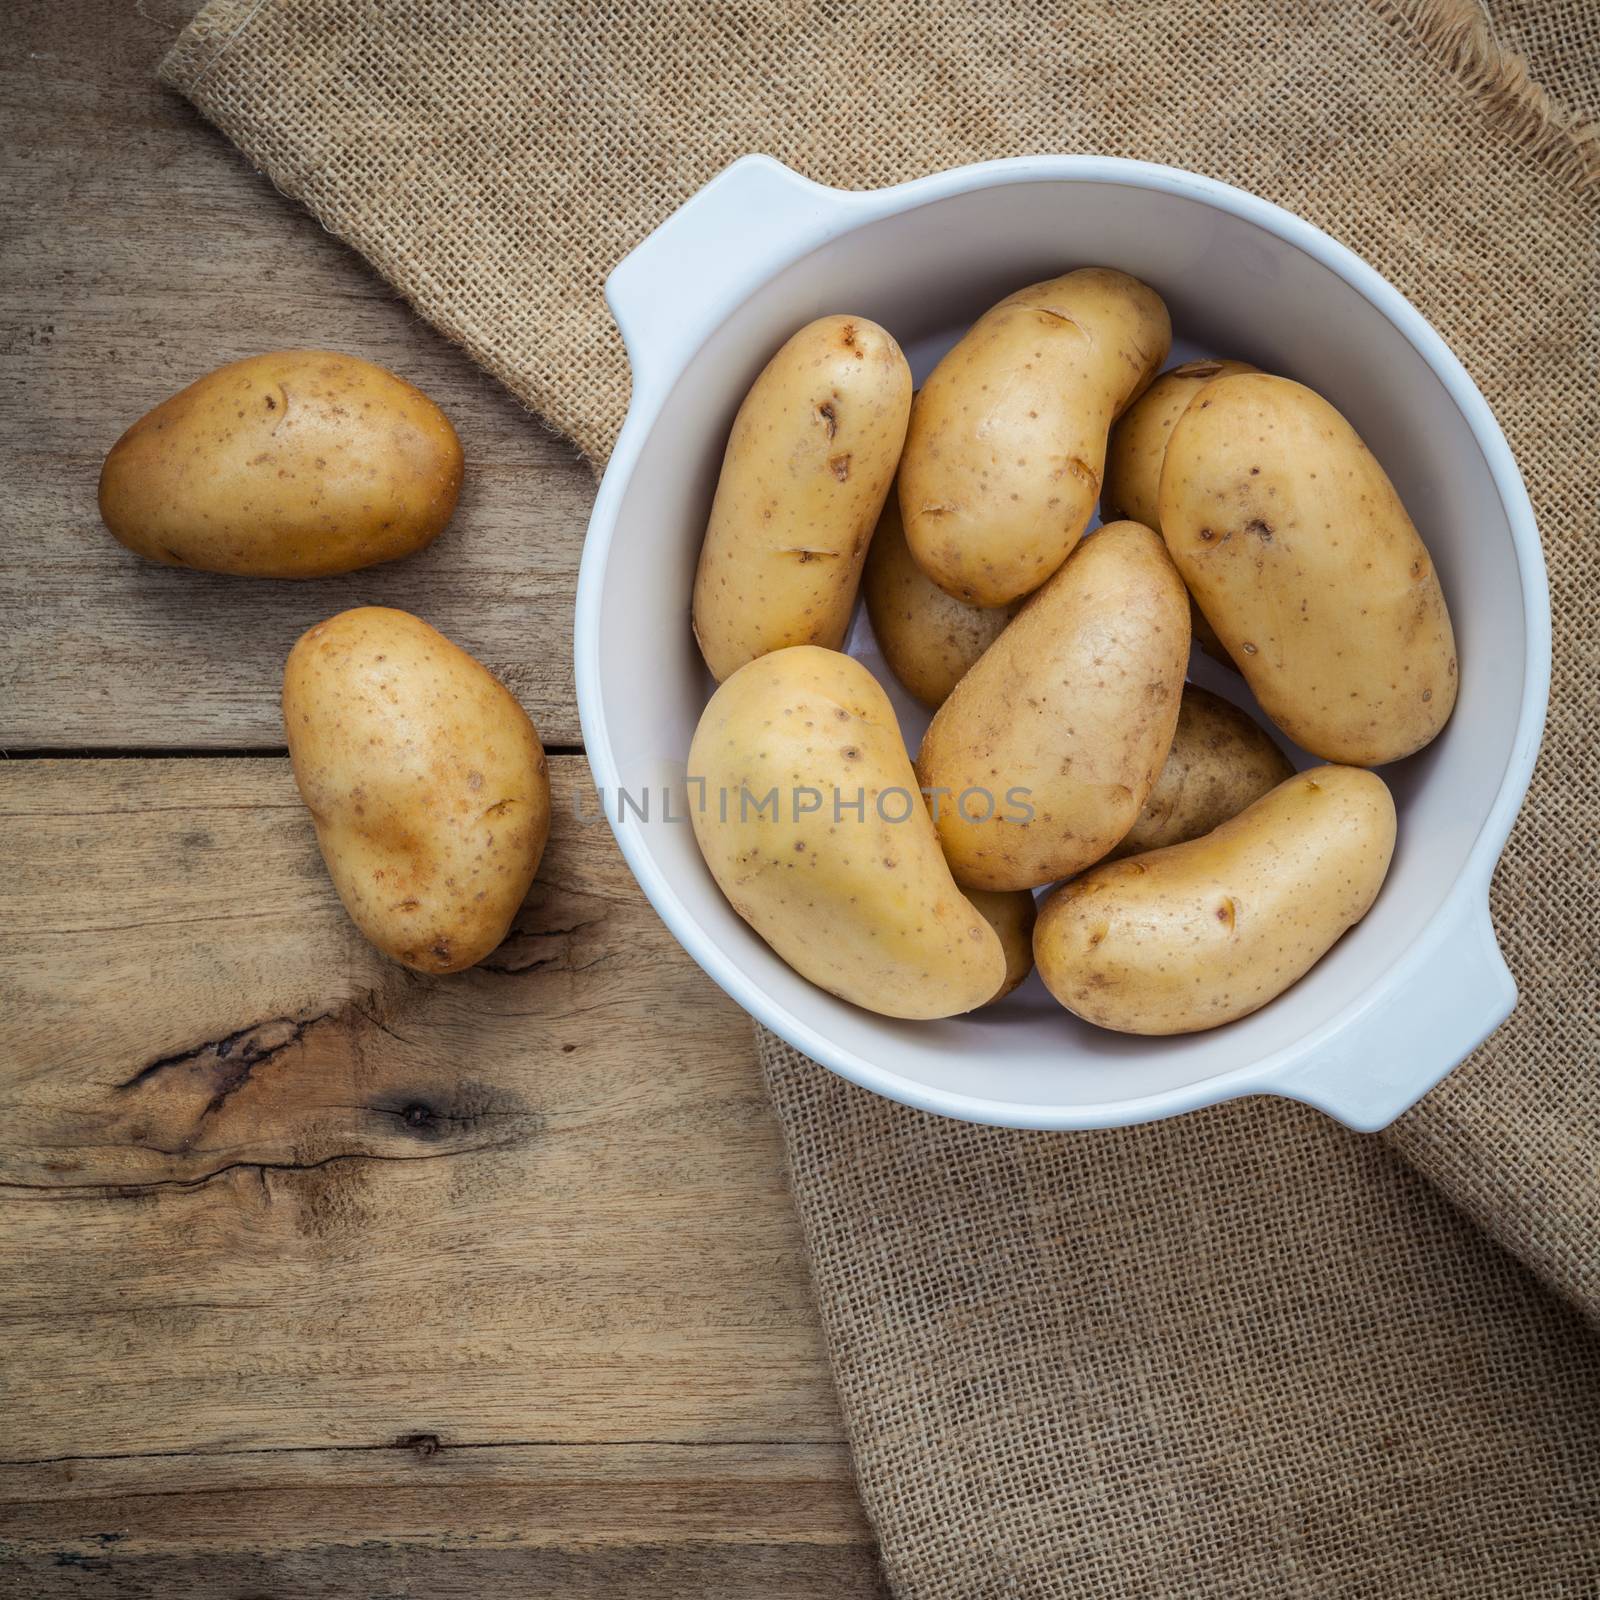 Composition of fresh organic potatoes in white ceramic bowl on h by kerdkanno